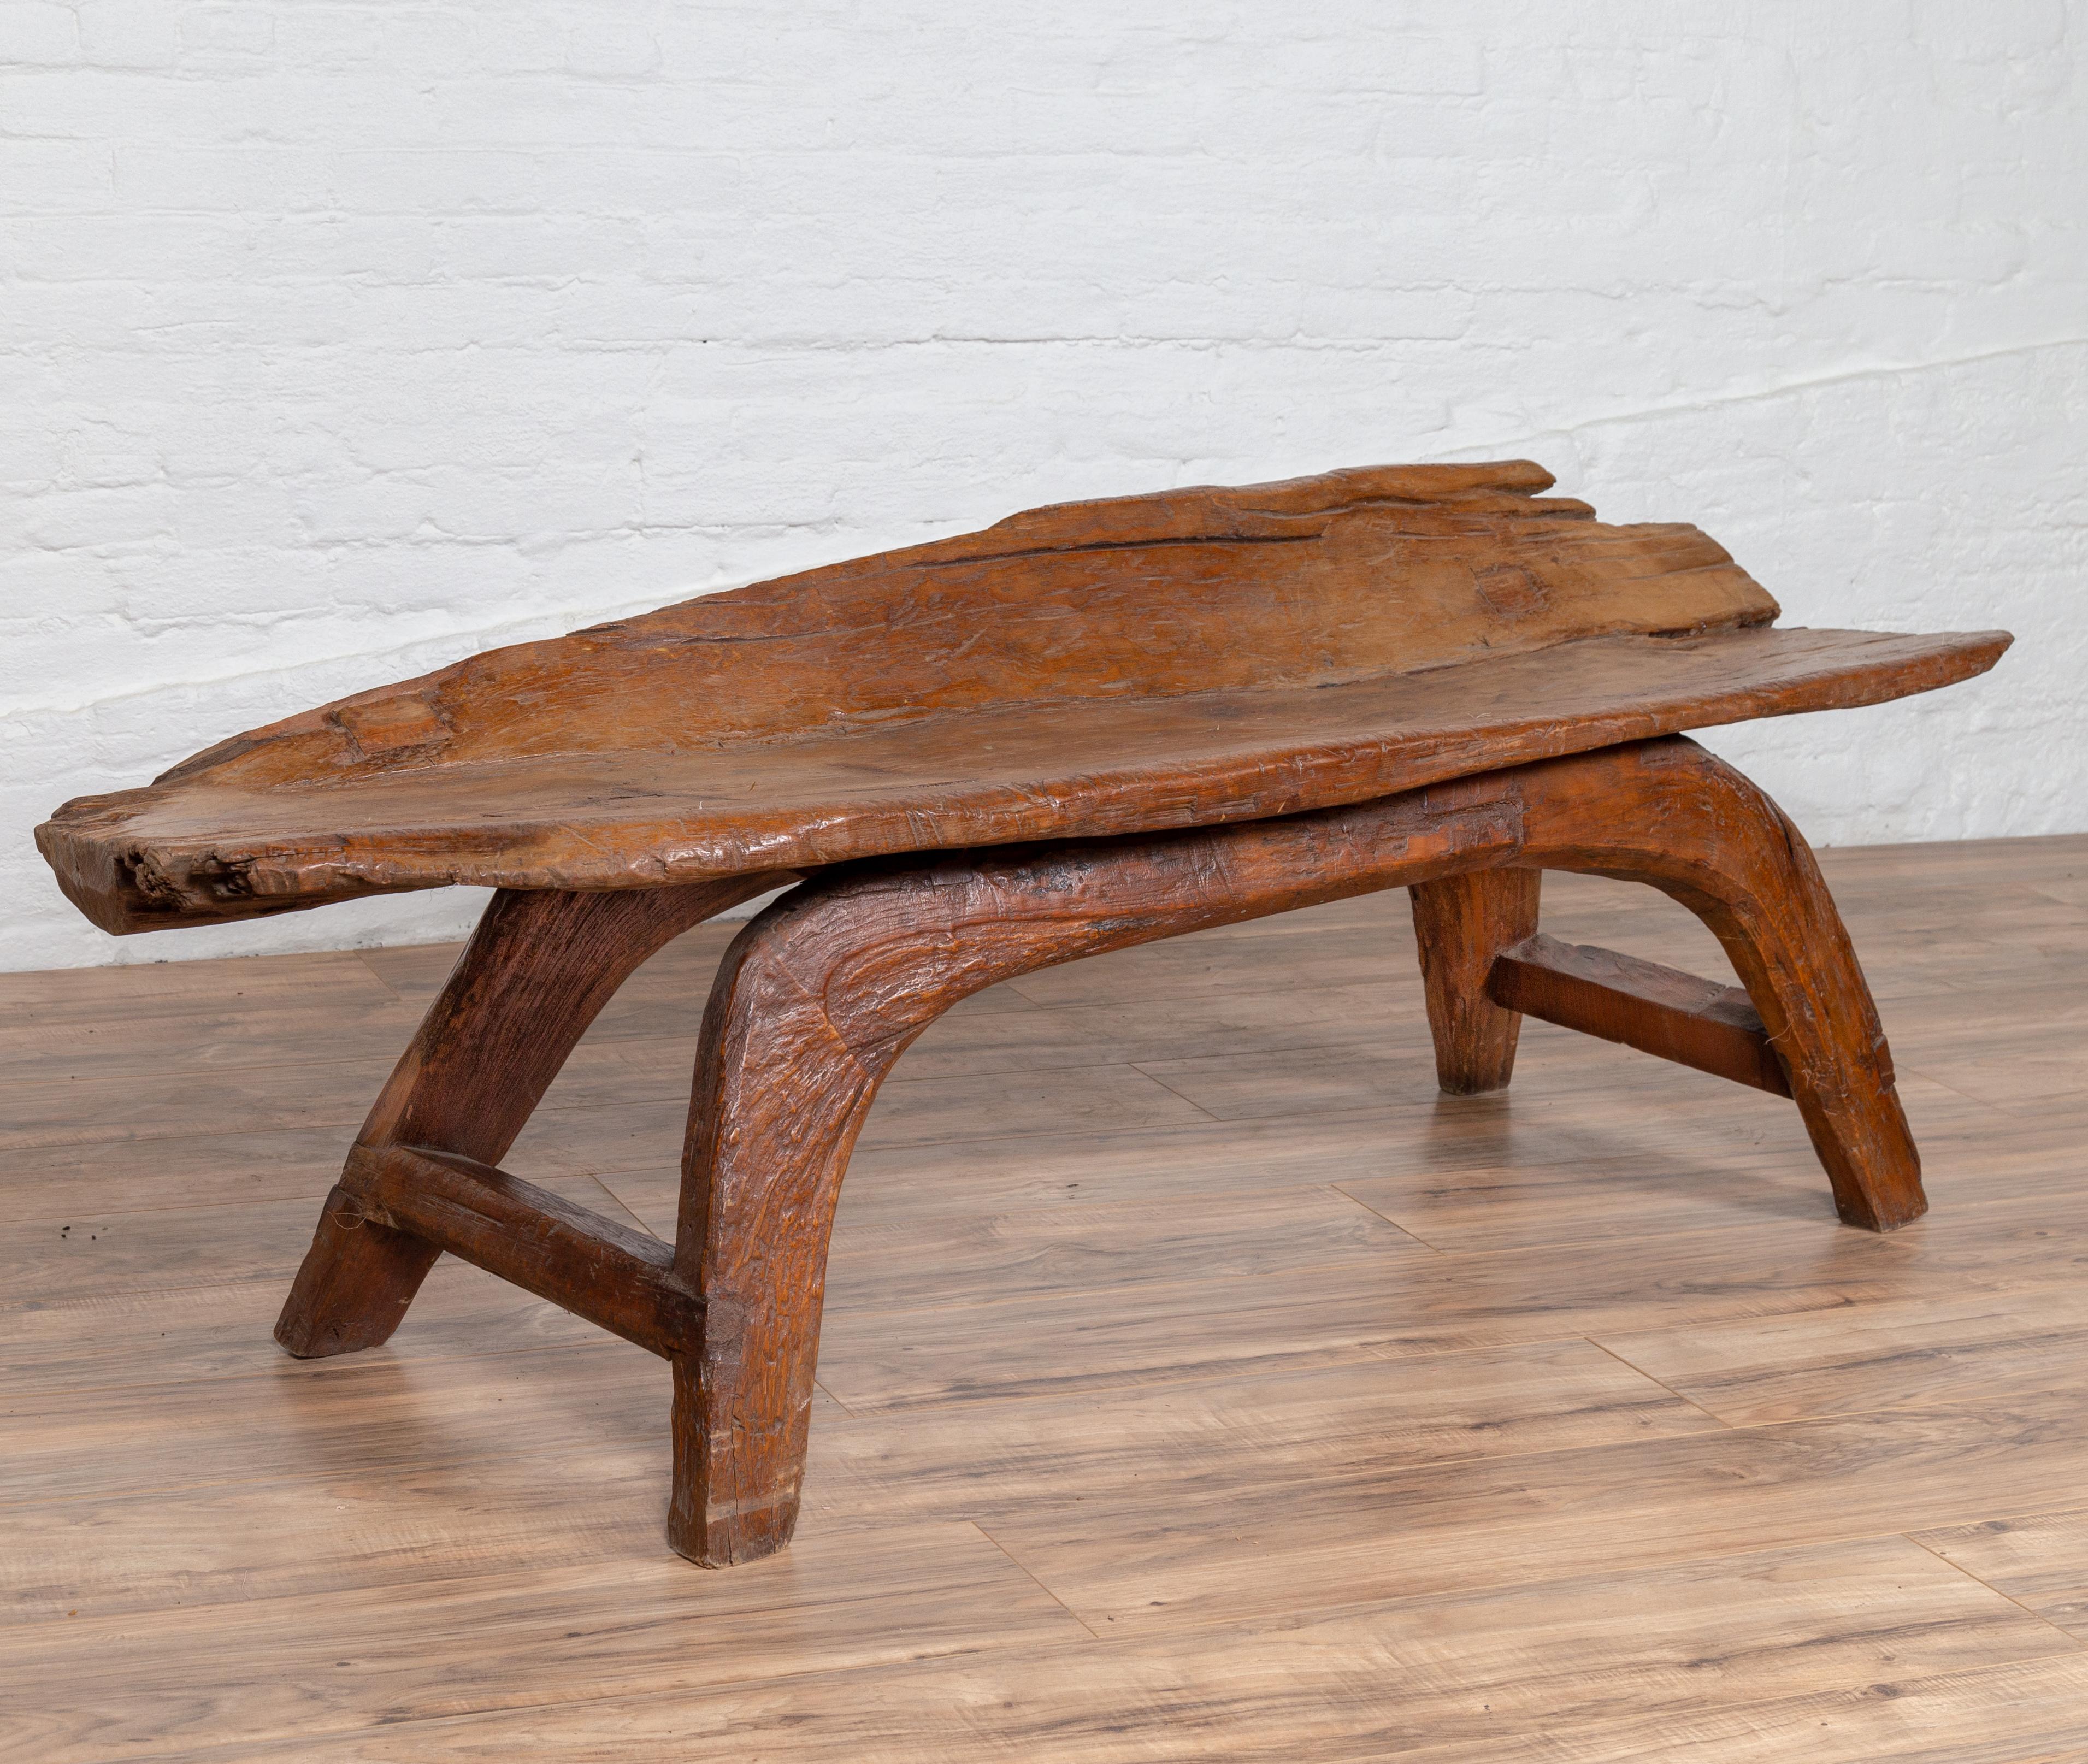 Freeform Design Antique Wooden Bench from the Riverbed of Bali with Arching Base 3